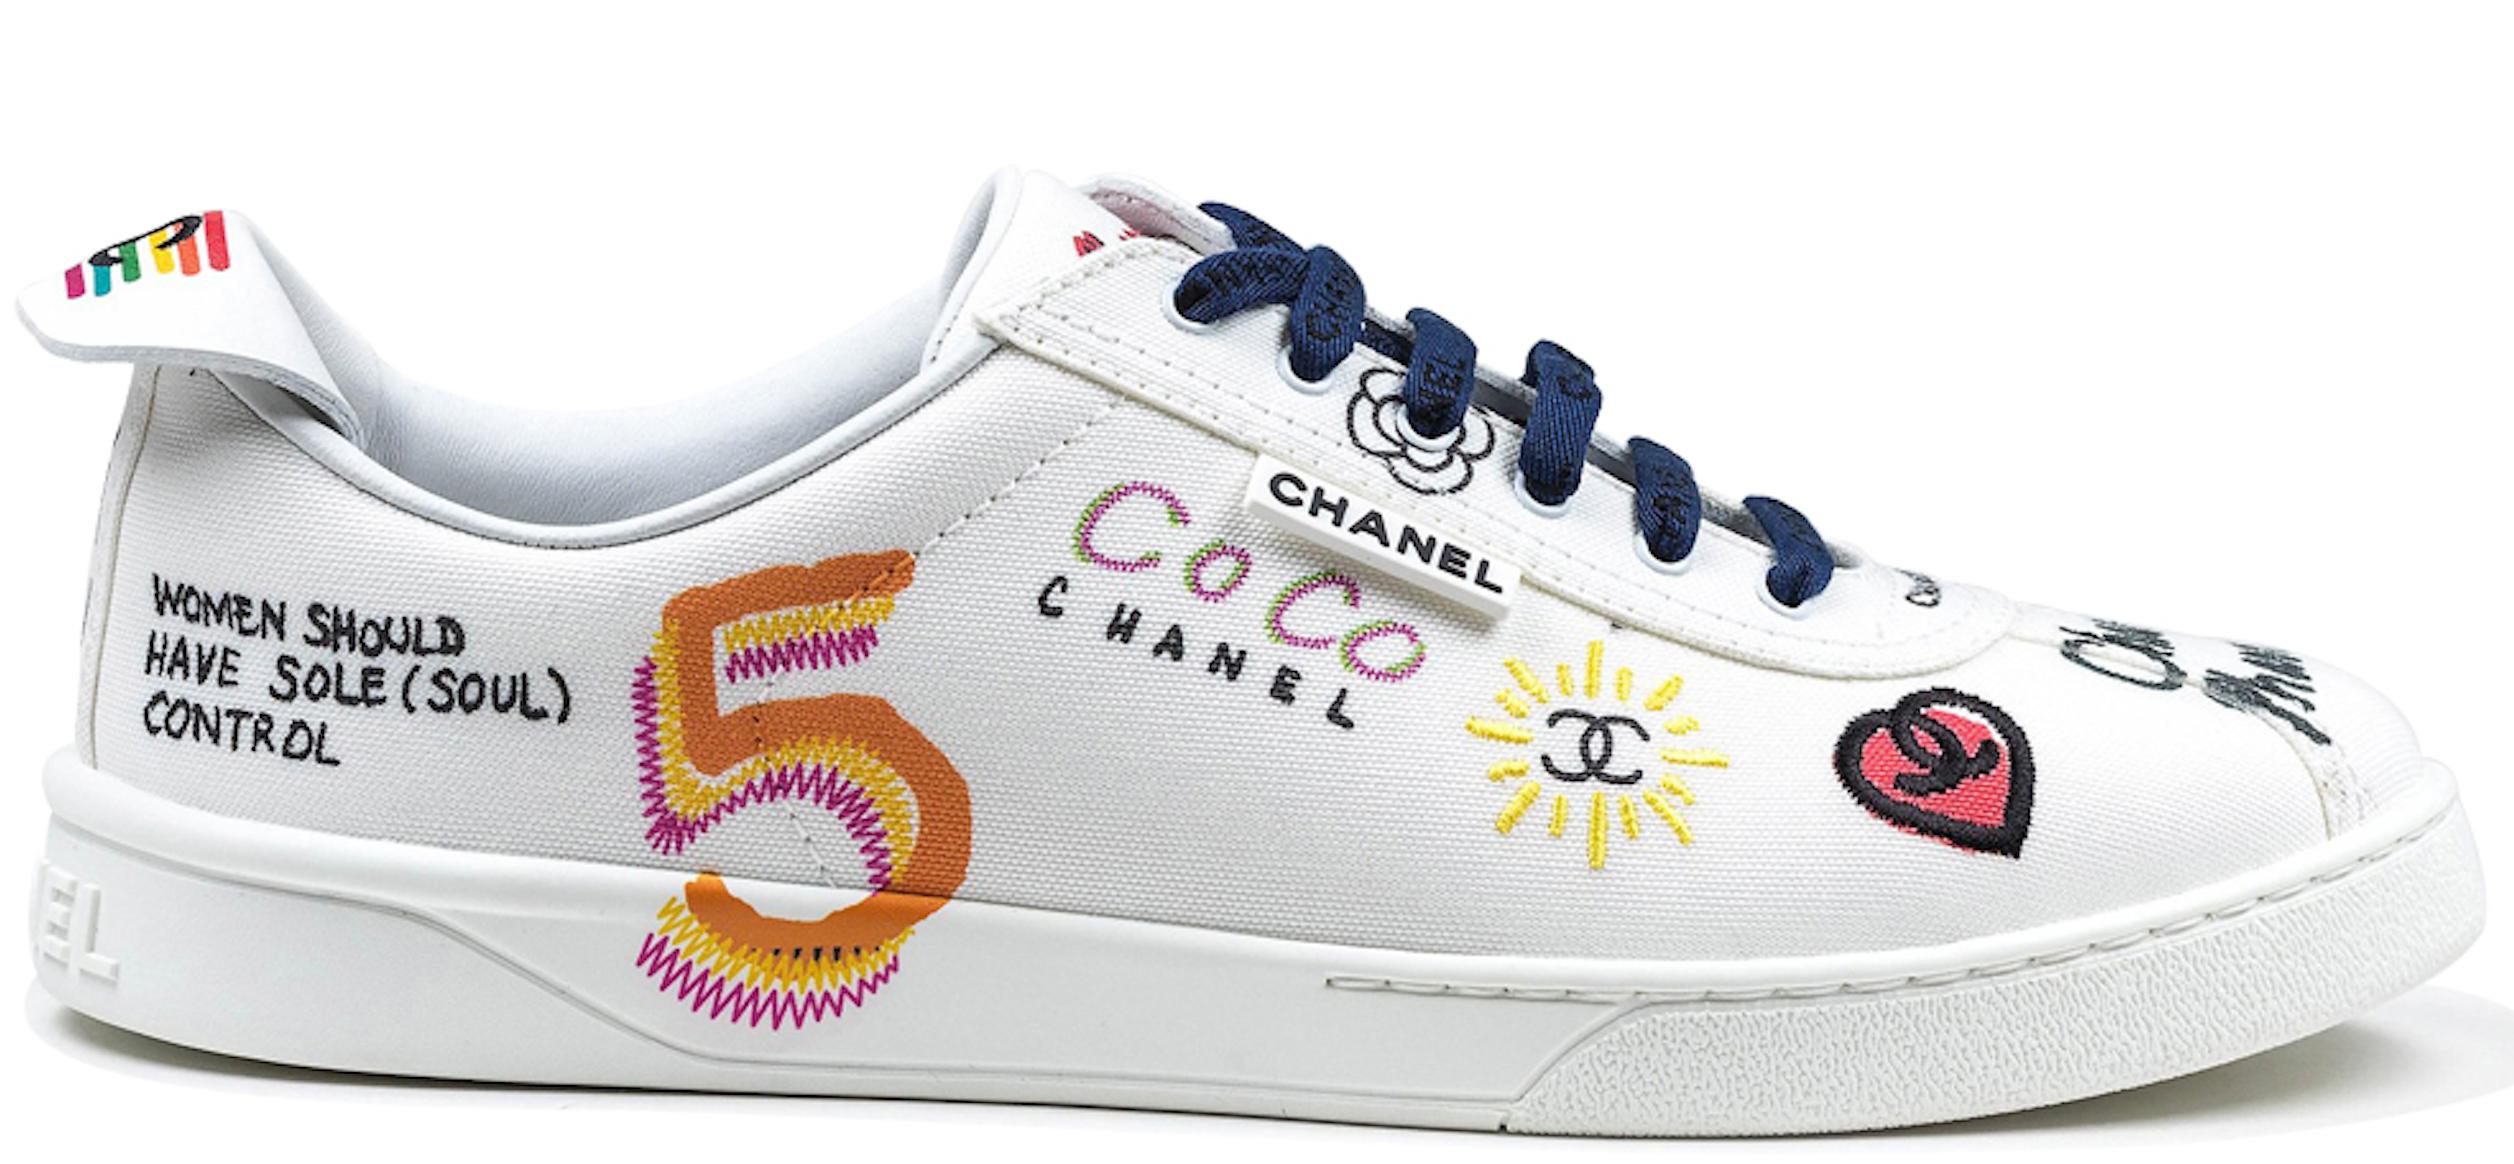 CHANEL Tennis Sneakers in Fuchsia Pink Velvet Leather and Suede